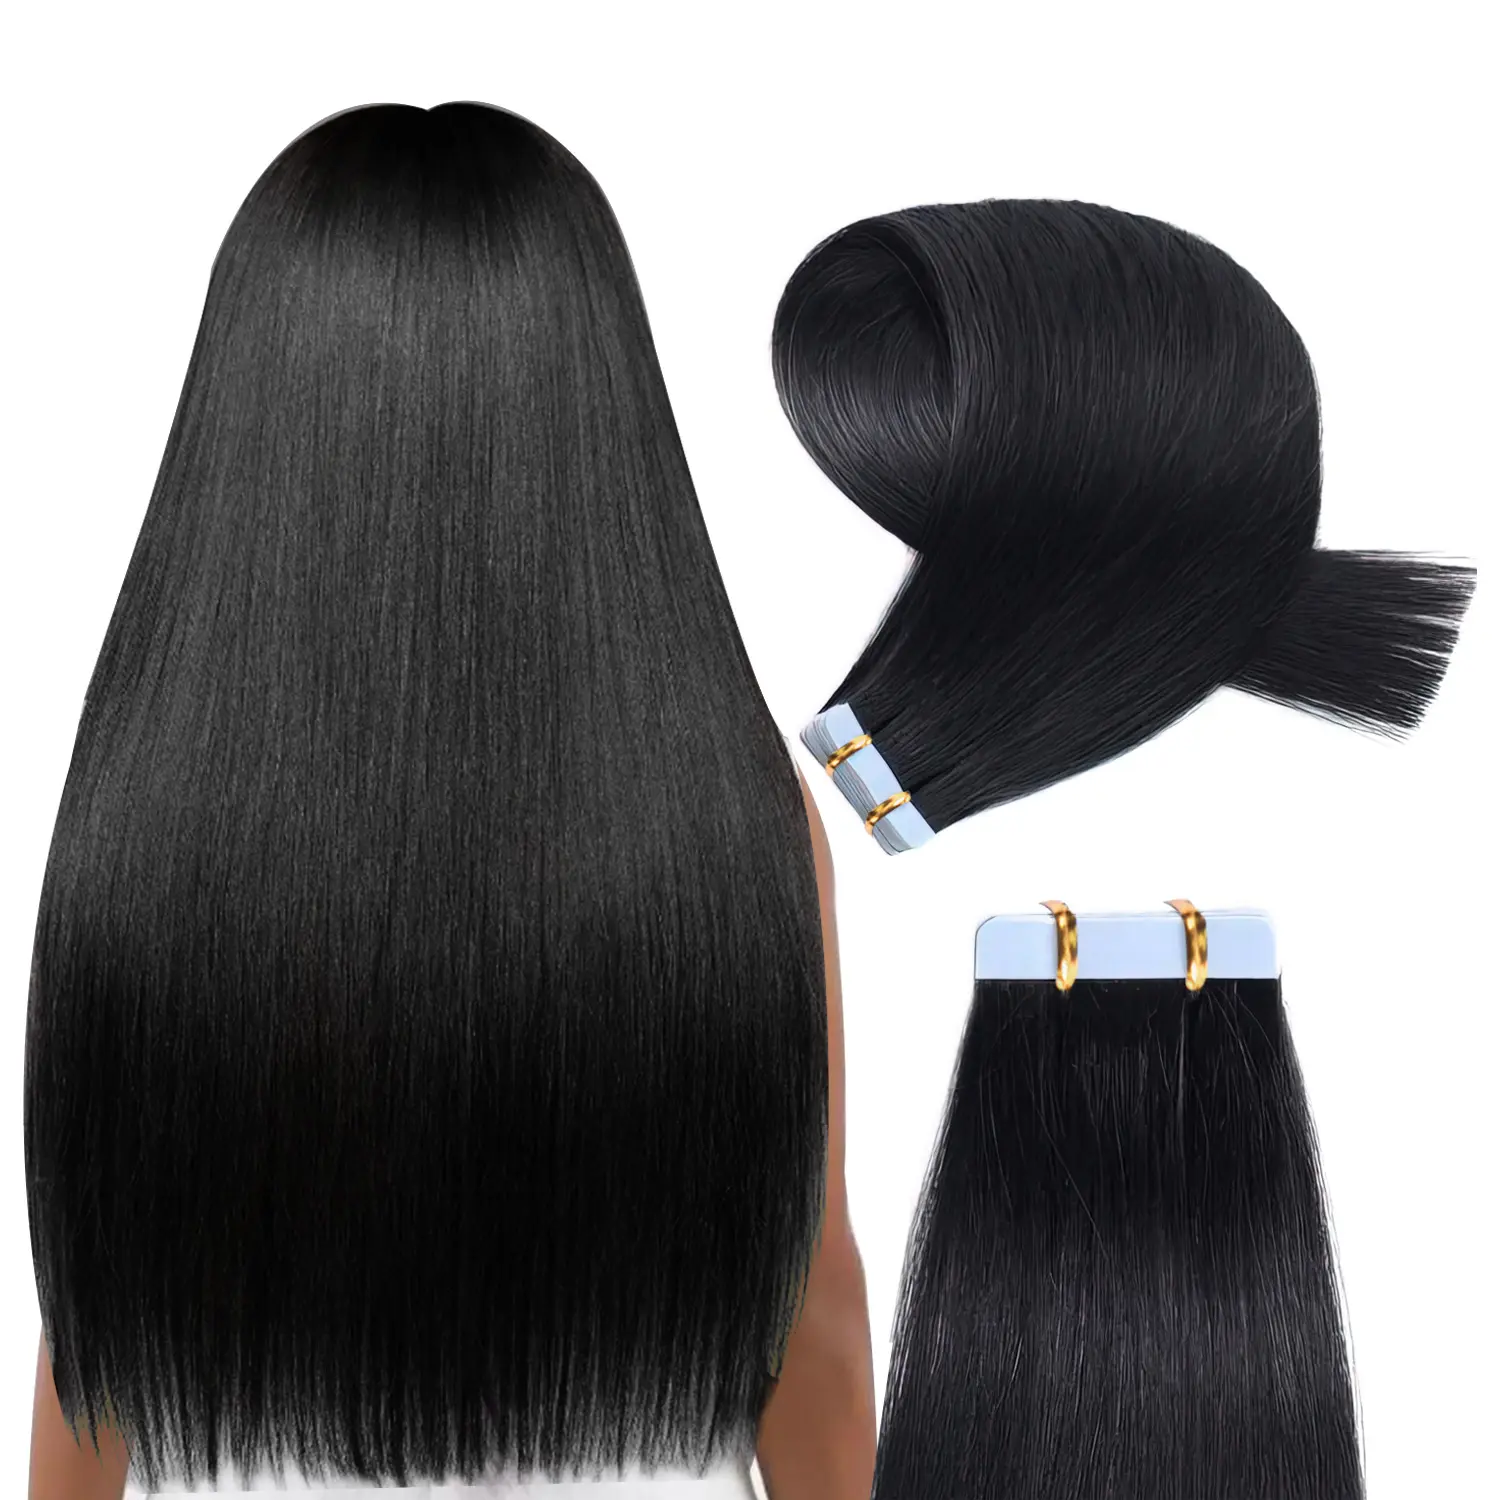 RXHAIR Straight Tape Ins Cheveux Vietnamien 30 Inch Tape In Hair Extensions 200 Grams Raw Indian Hair Straight Tape Ins